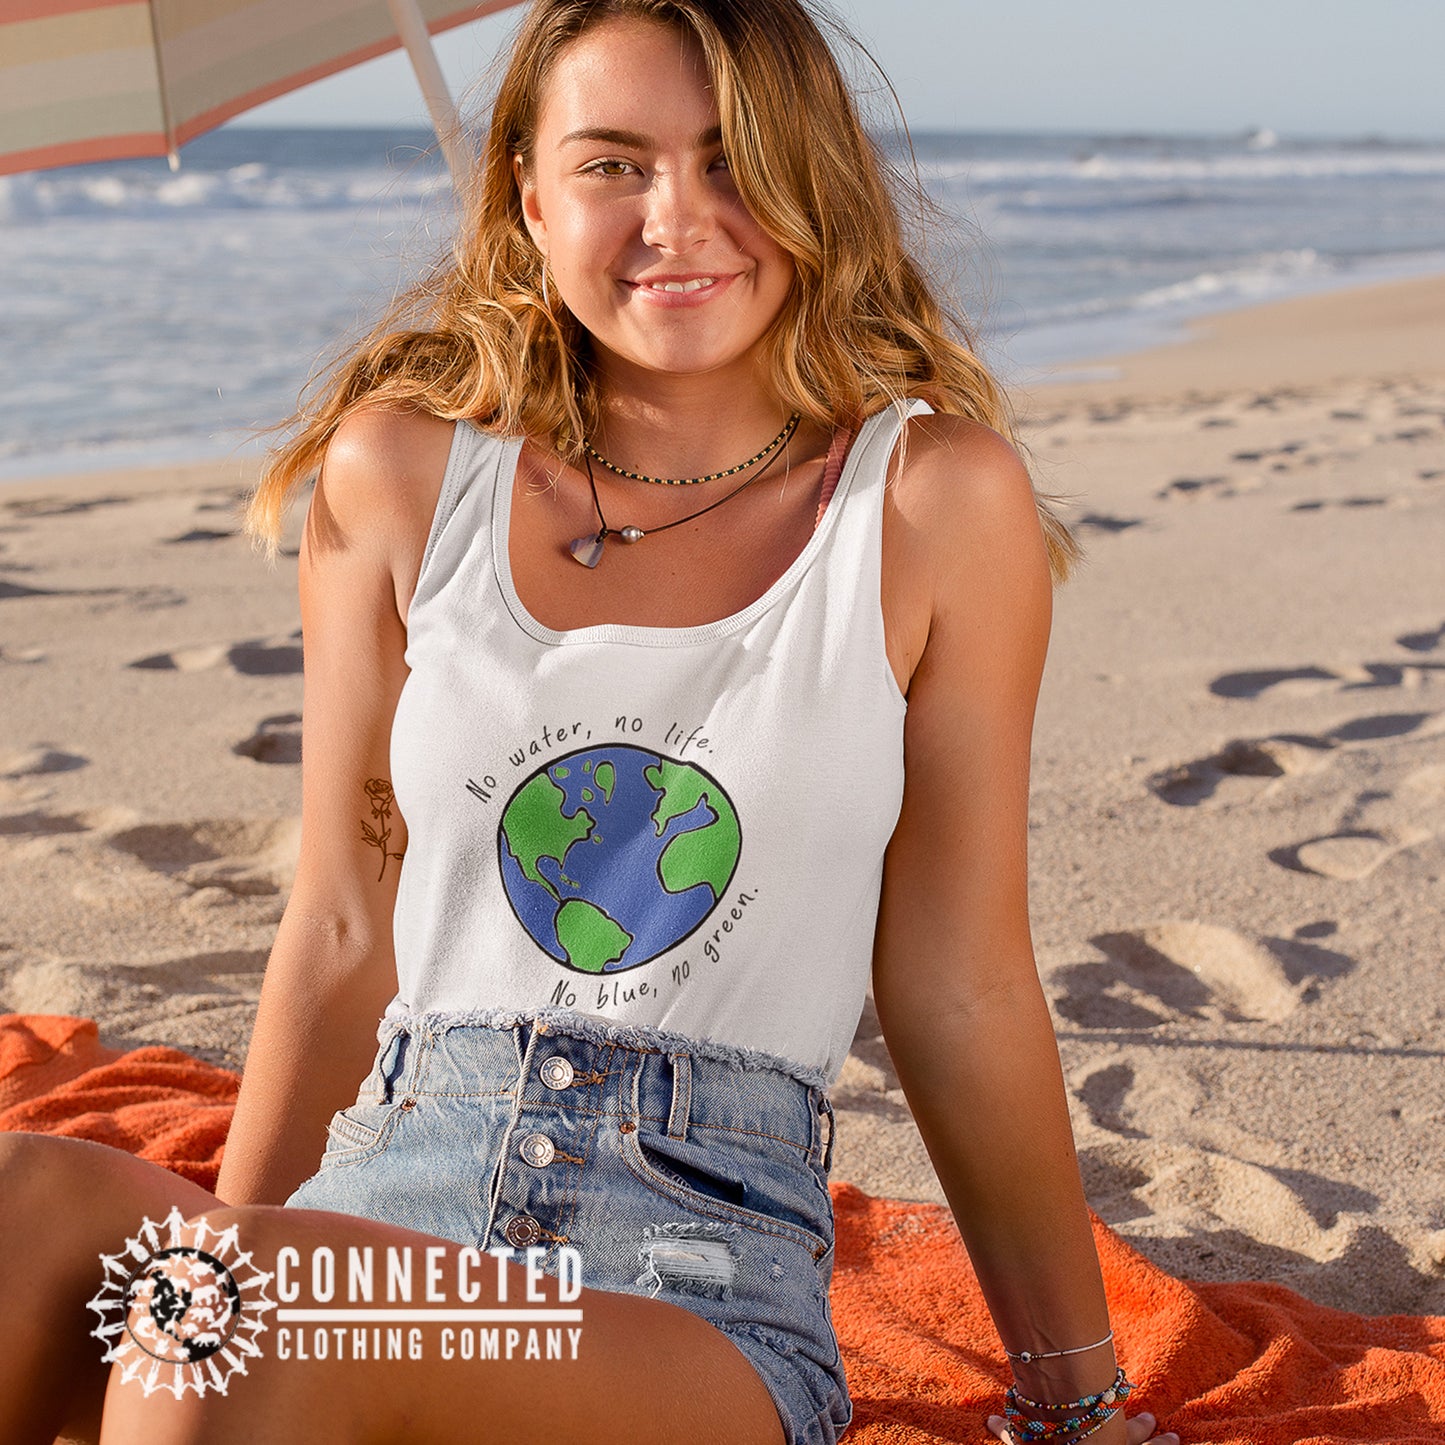 Model Wearing White No Blue No Green Women's Relaxed Tank - Connected Clothing Company - Ethically and Sustainably Made - 10% of profits donated to Mission Blue ocean conservation